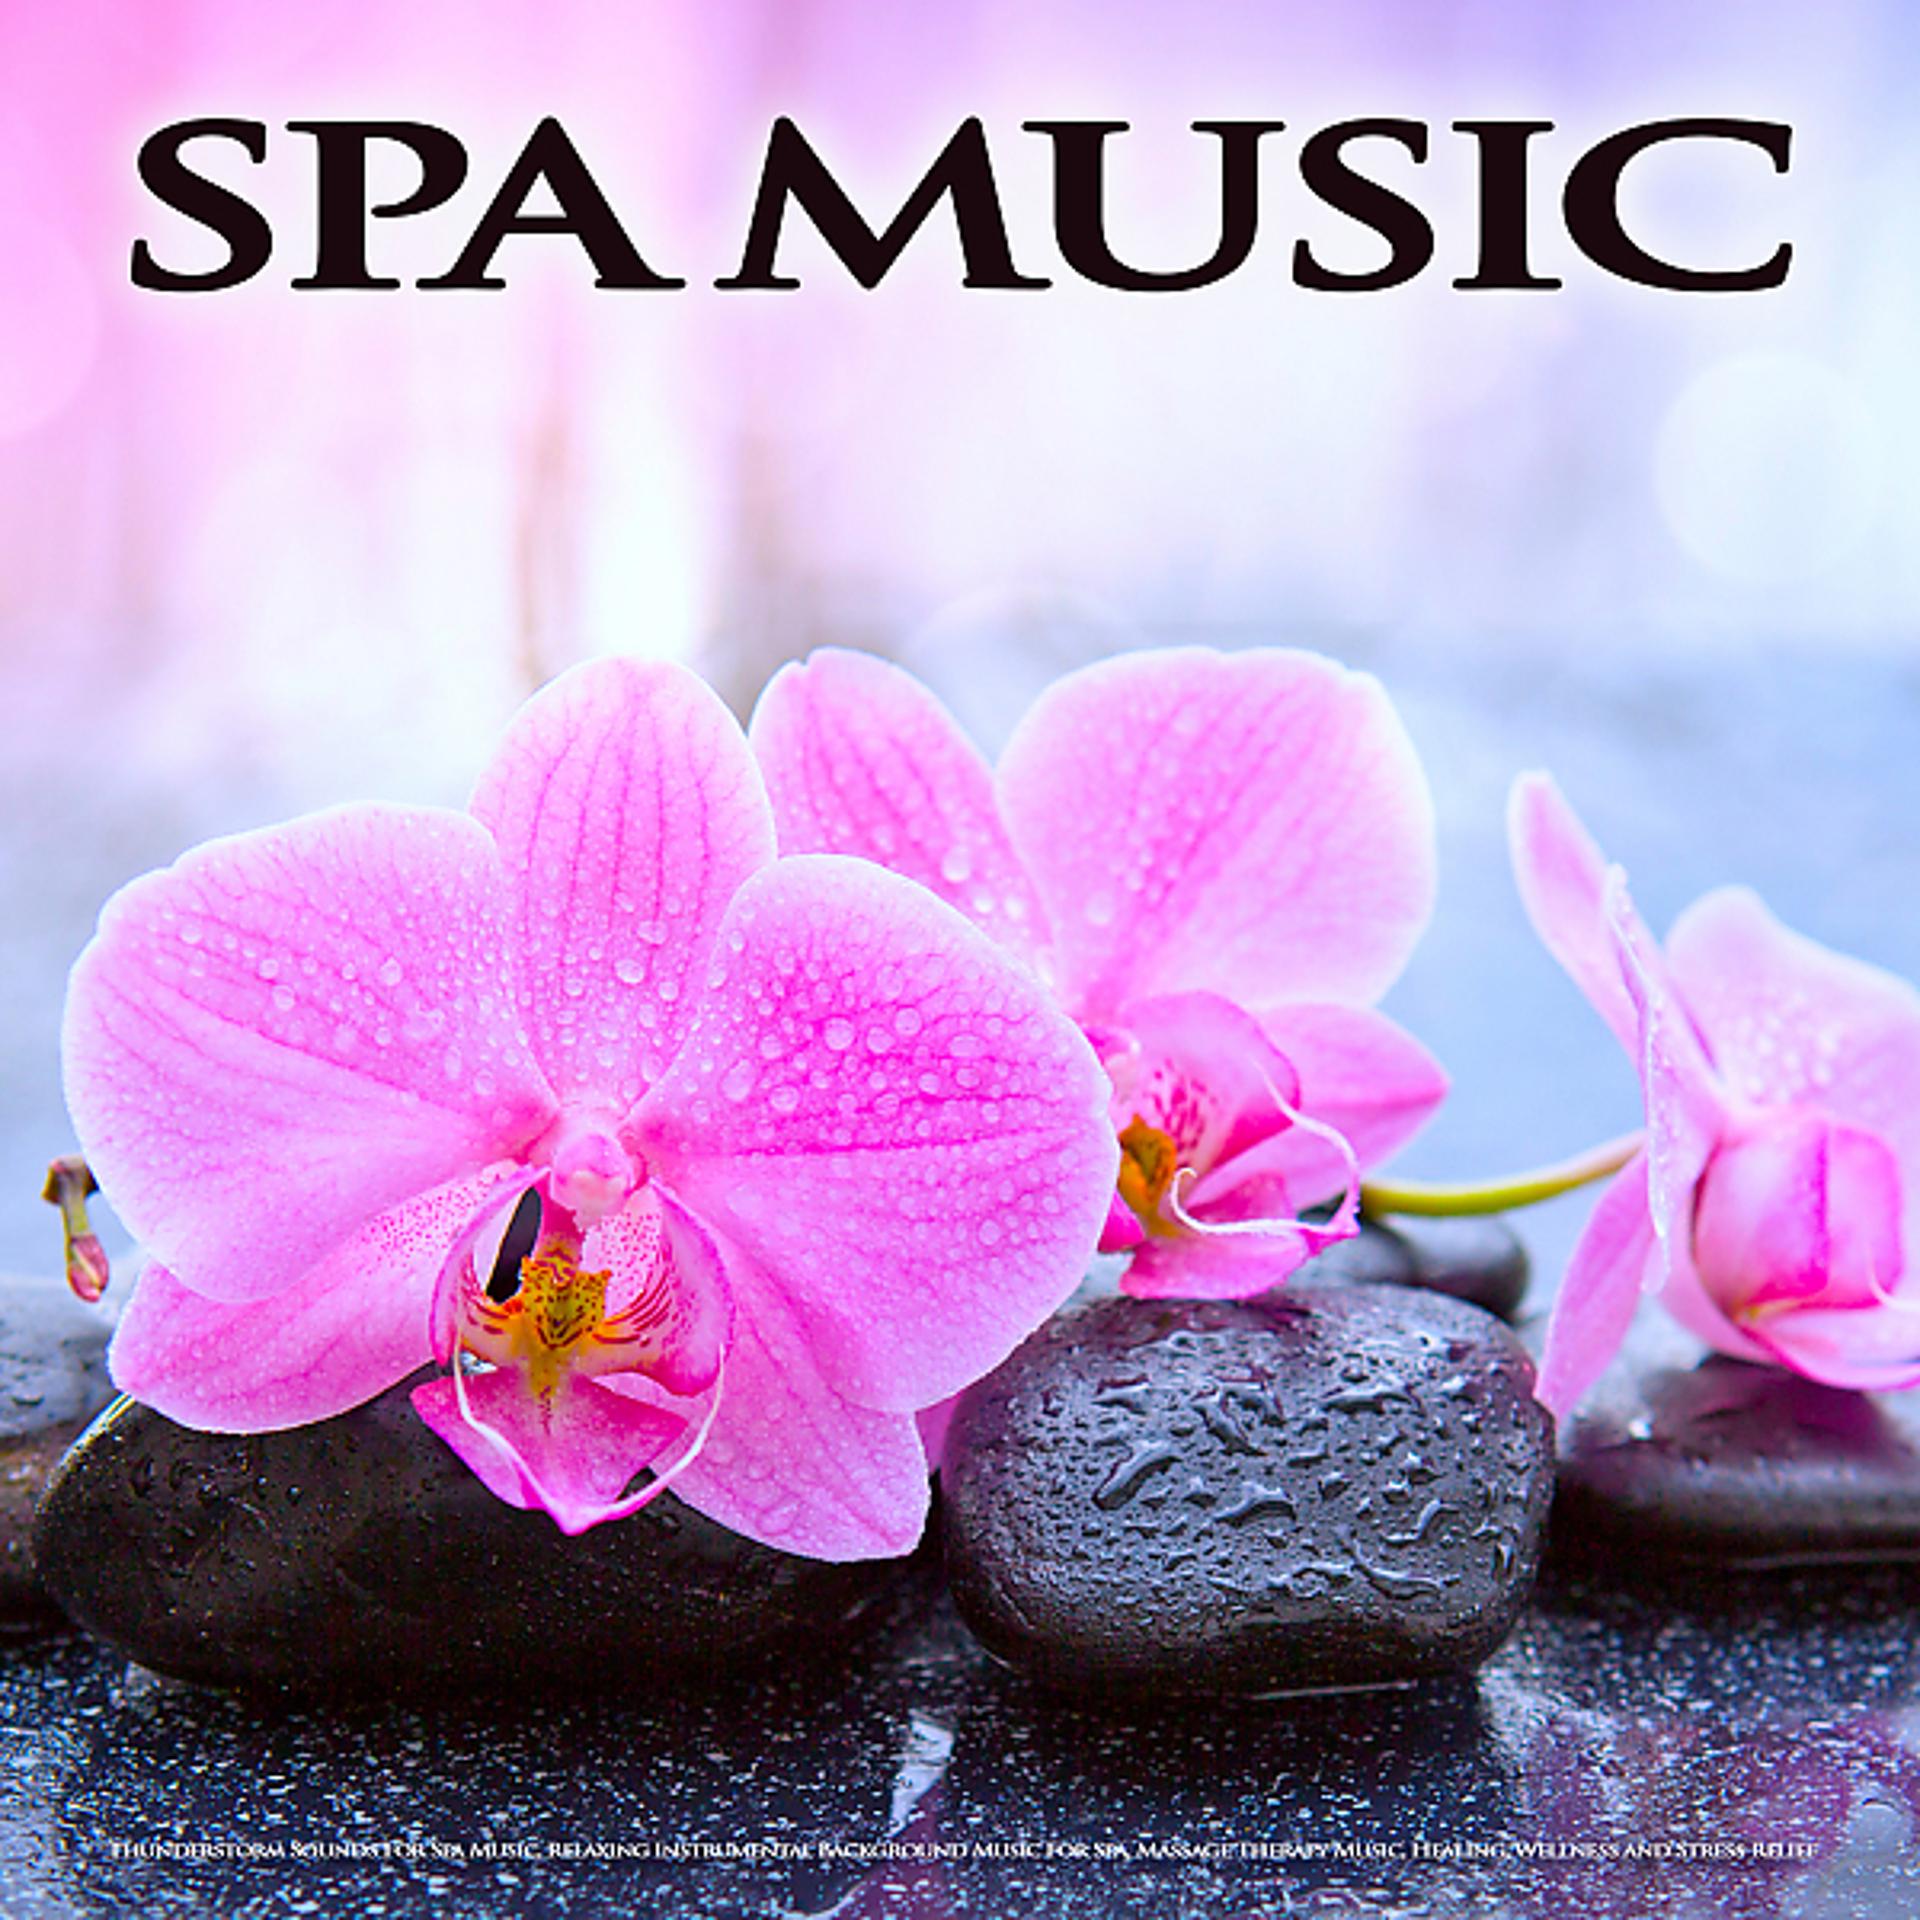 Постер альбома Spa Music: Thunderstorm Sounds For Spa Music, Relaxing Instrumental Background Music For Spa, Massage Therapy Music, Healing, Wellness and Stress Relief